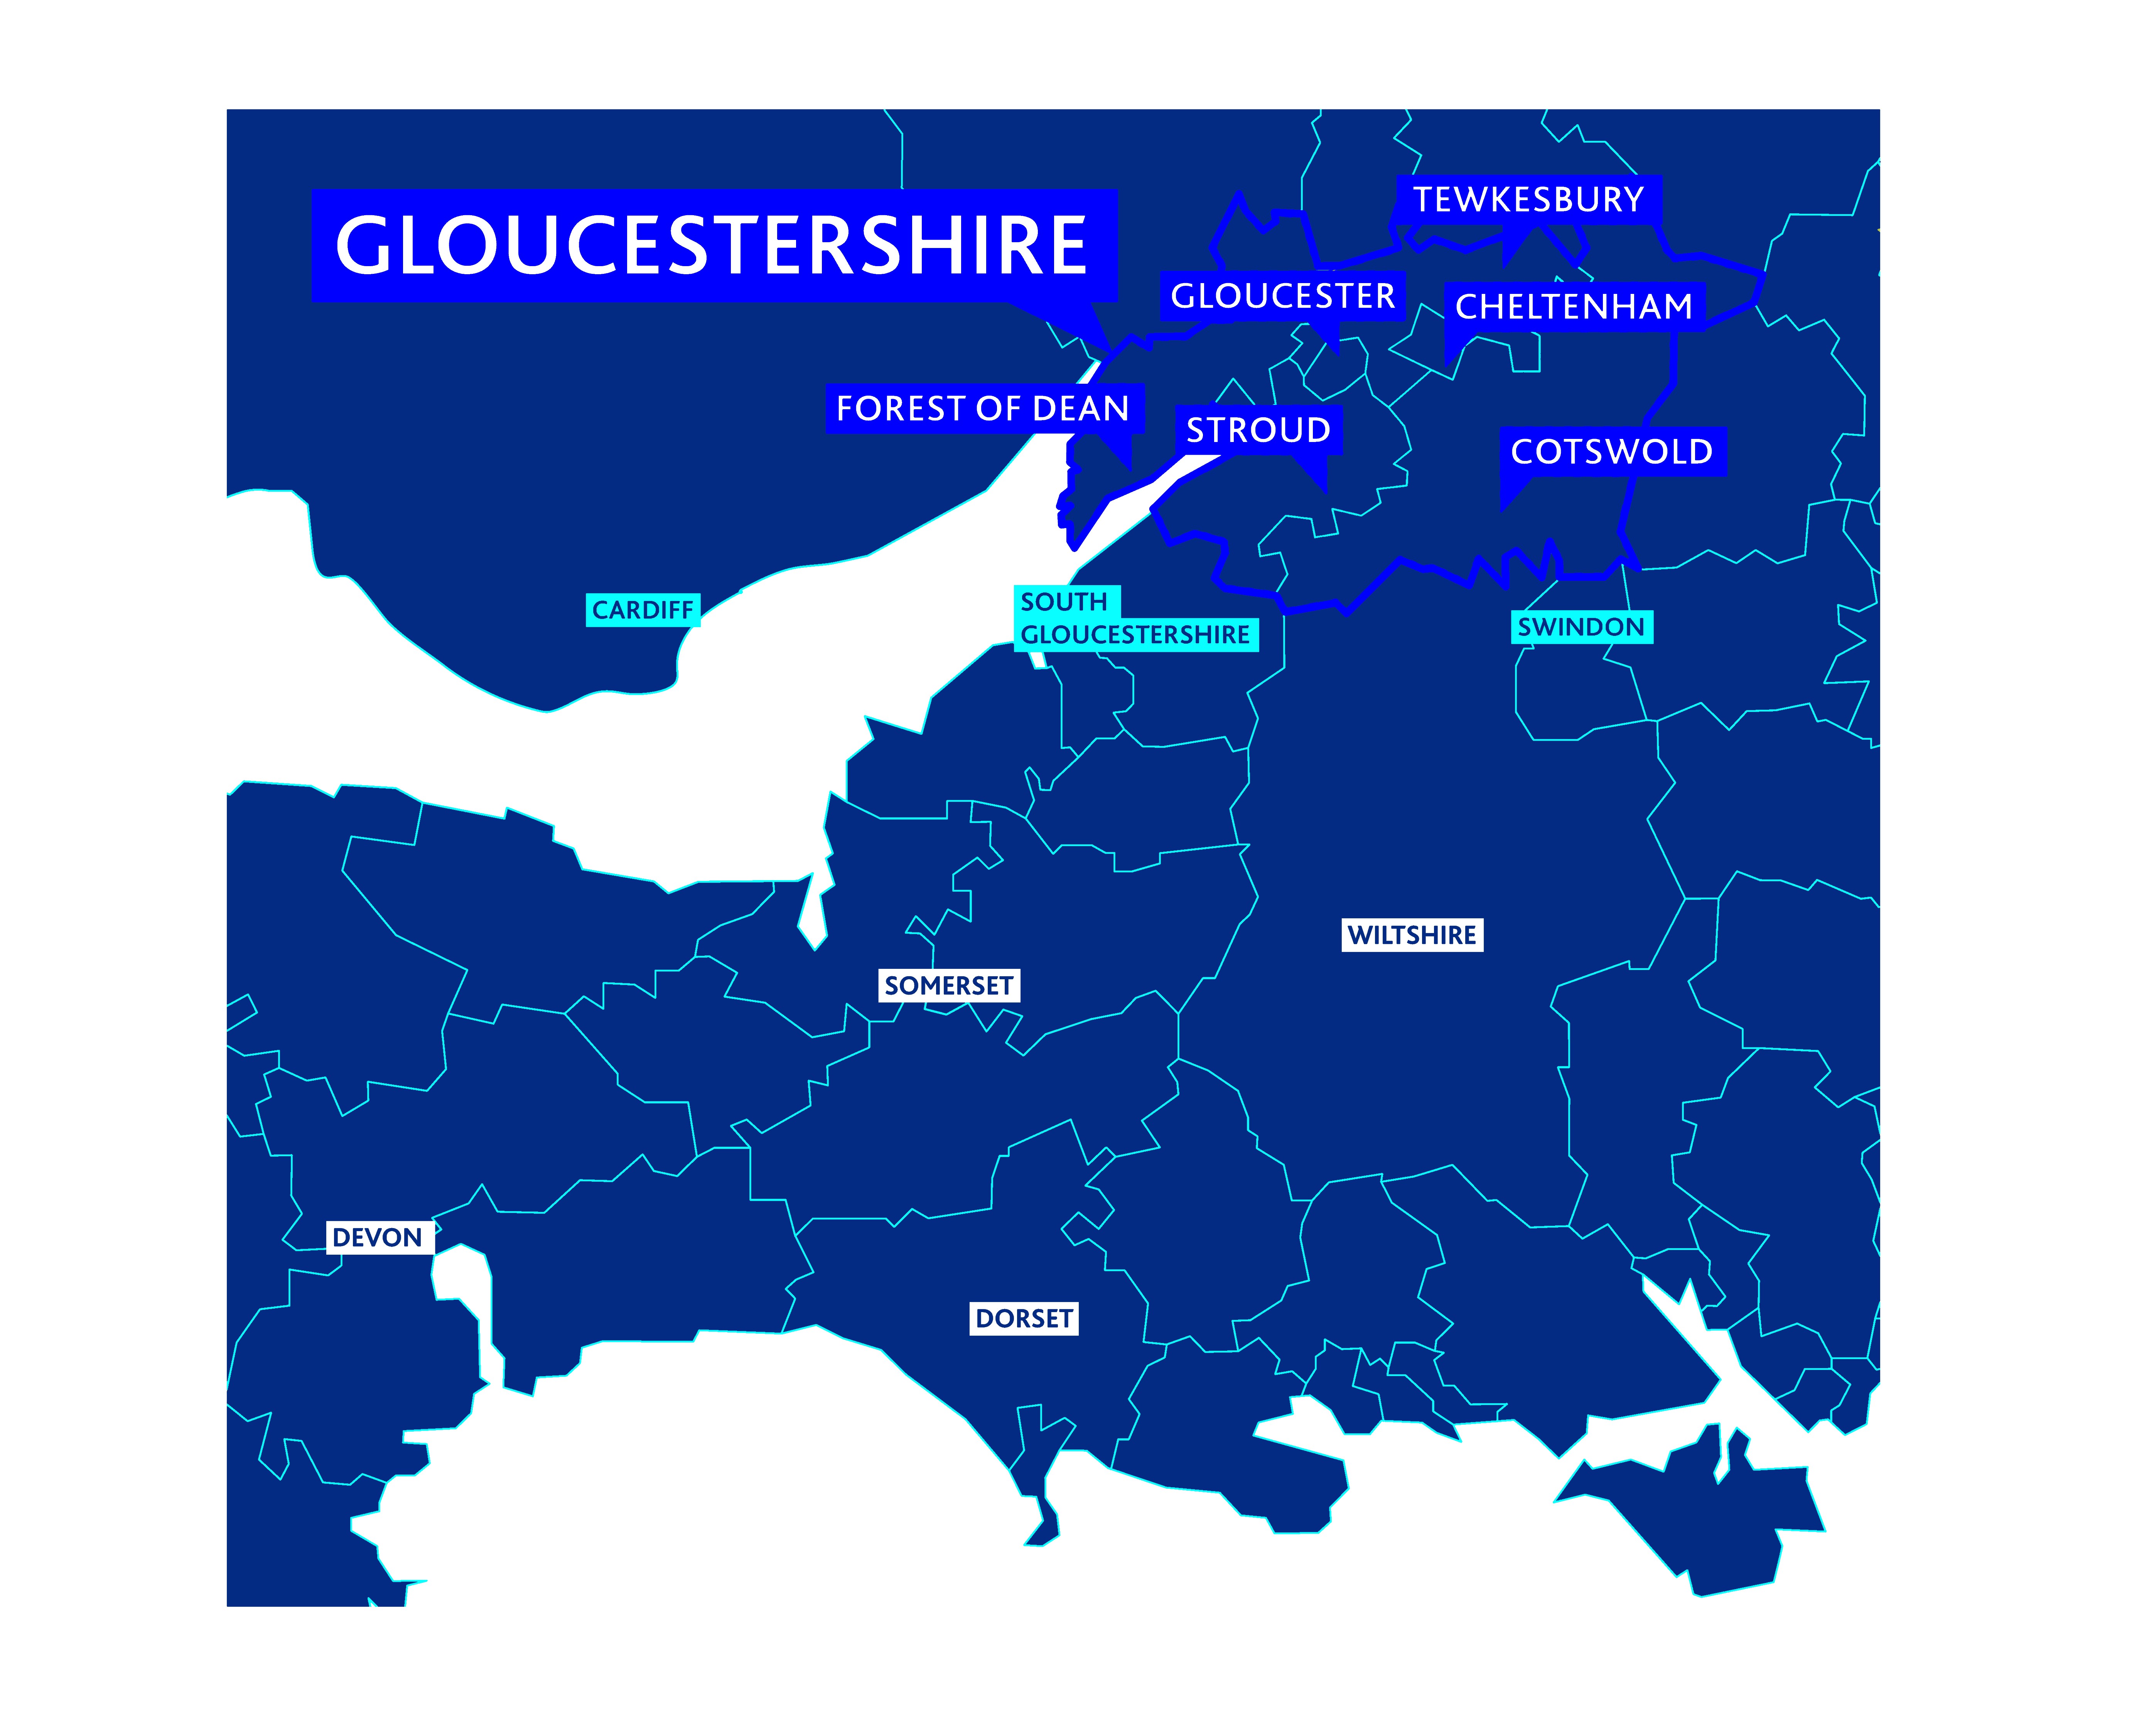 Image shows the region in Gloucestershire, following the Gloucestershire LEP region, that the LSIP will be focusing on.